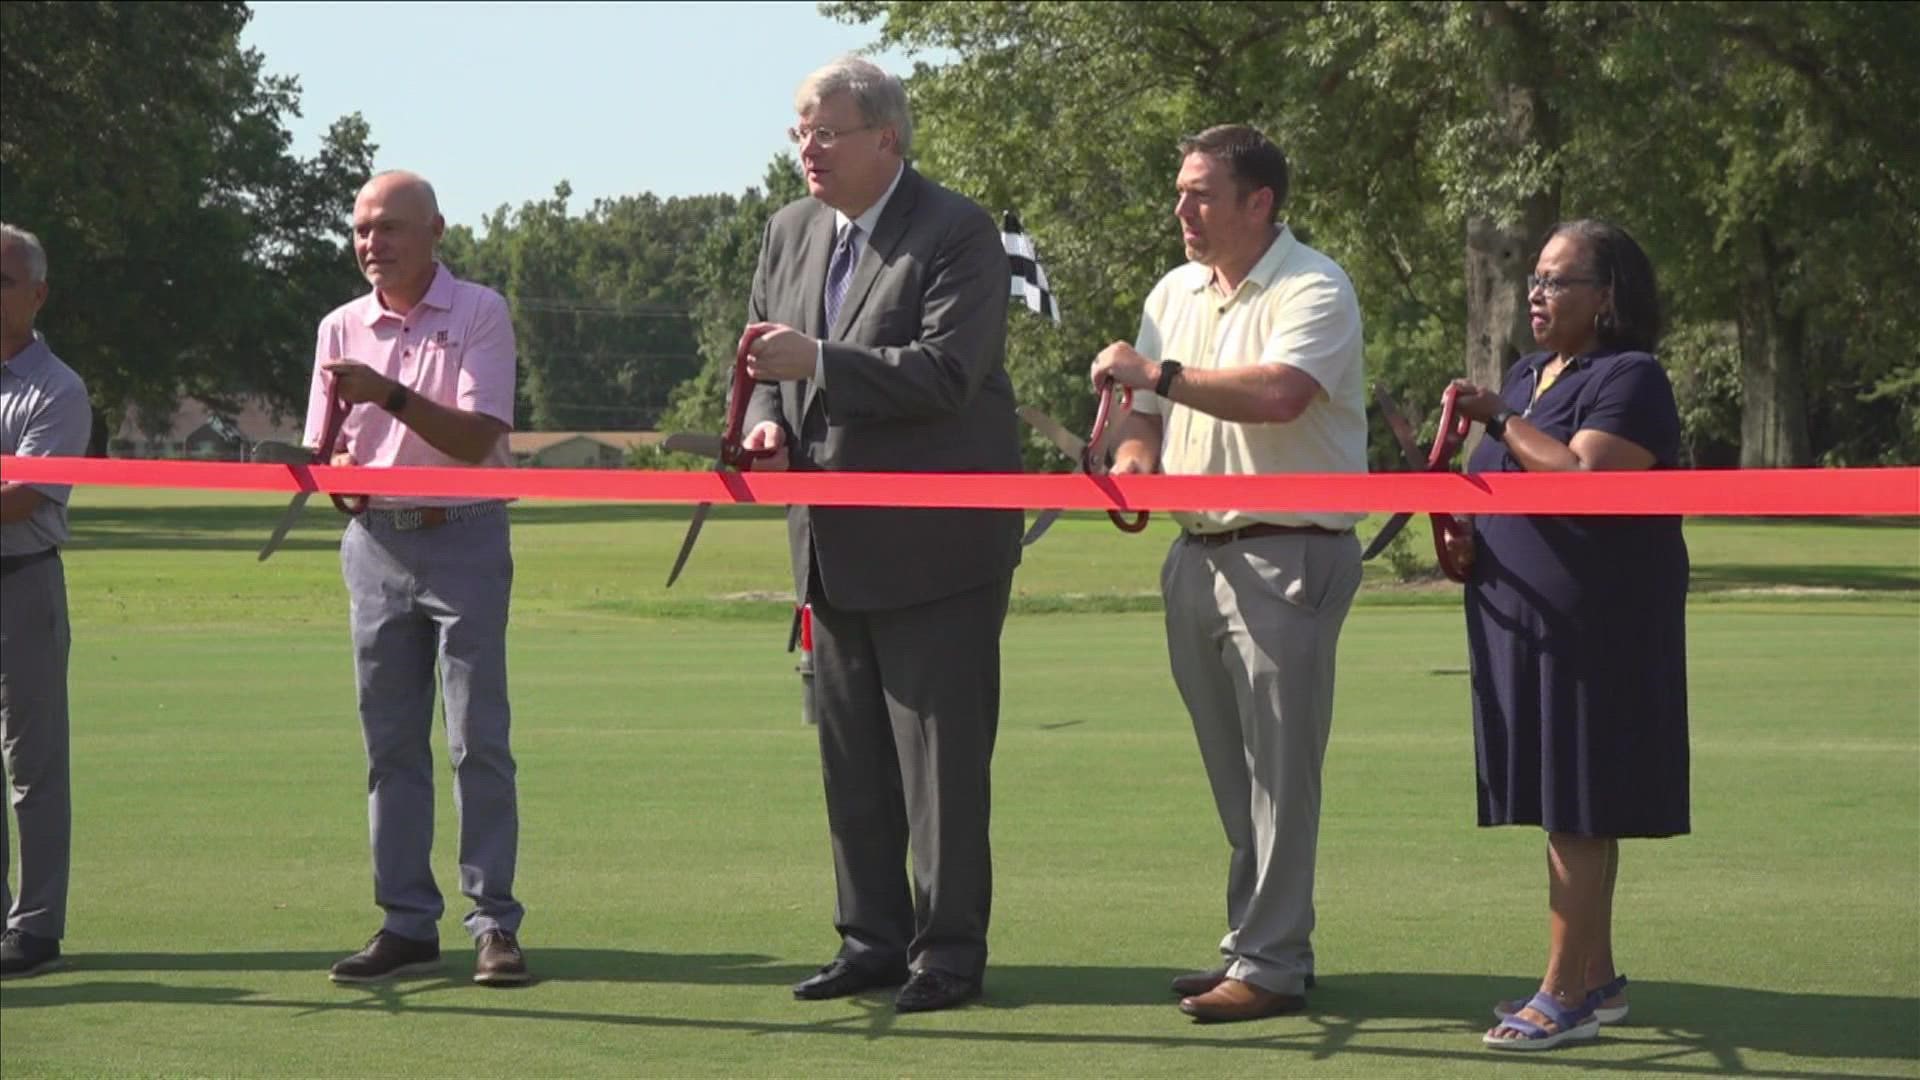 Memphis city leaders, including mayor Jim Strickland, gathered Tuesday to cut the ribbon on the renovation of a local golf course.